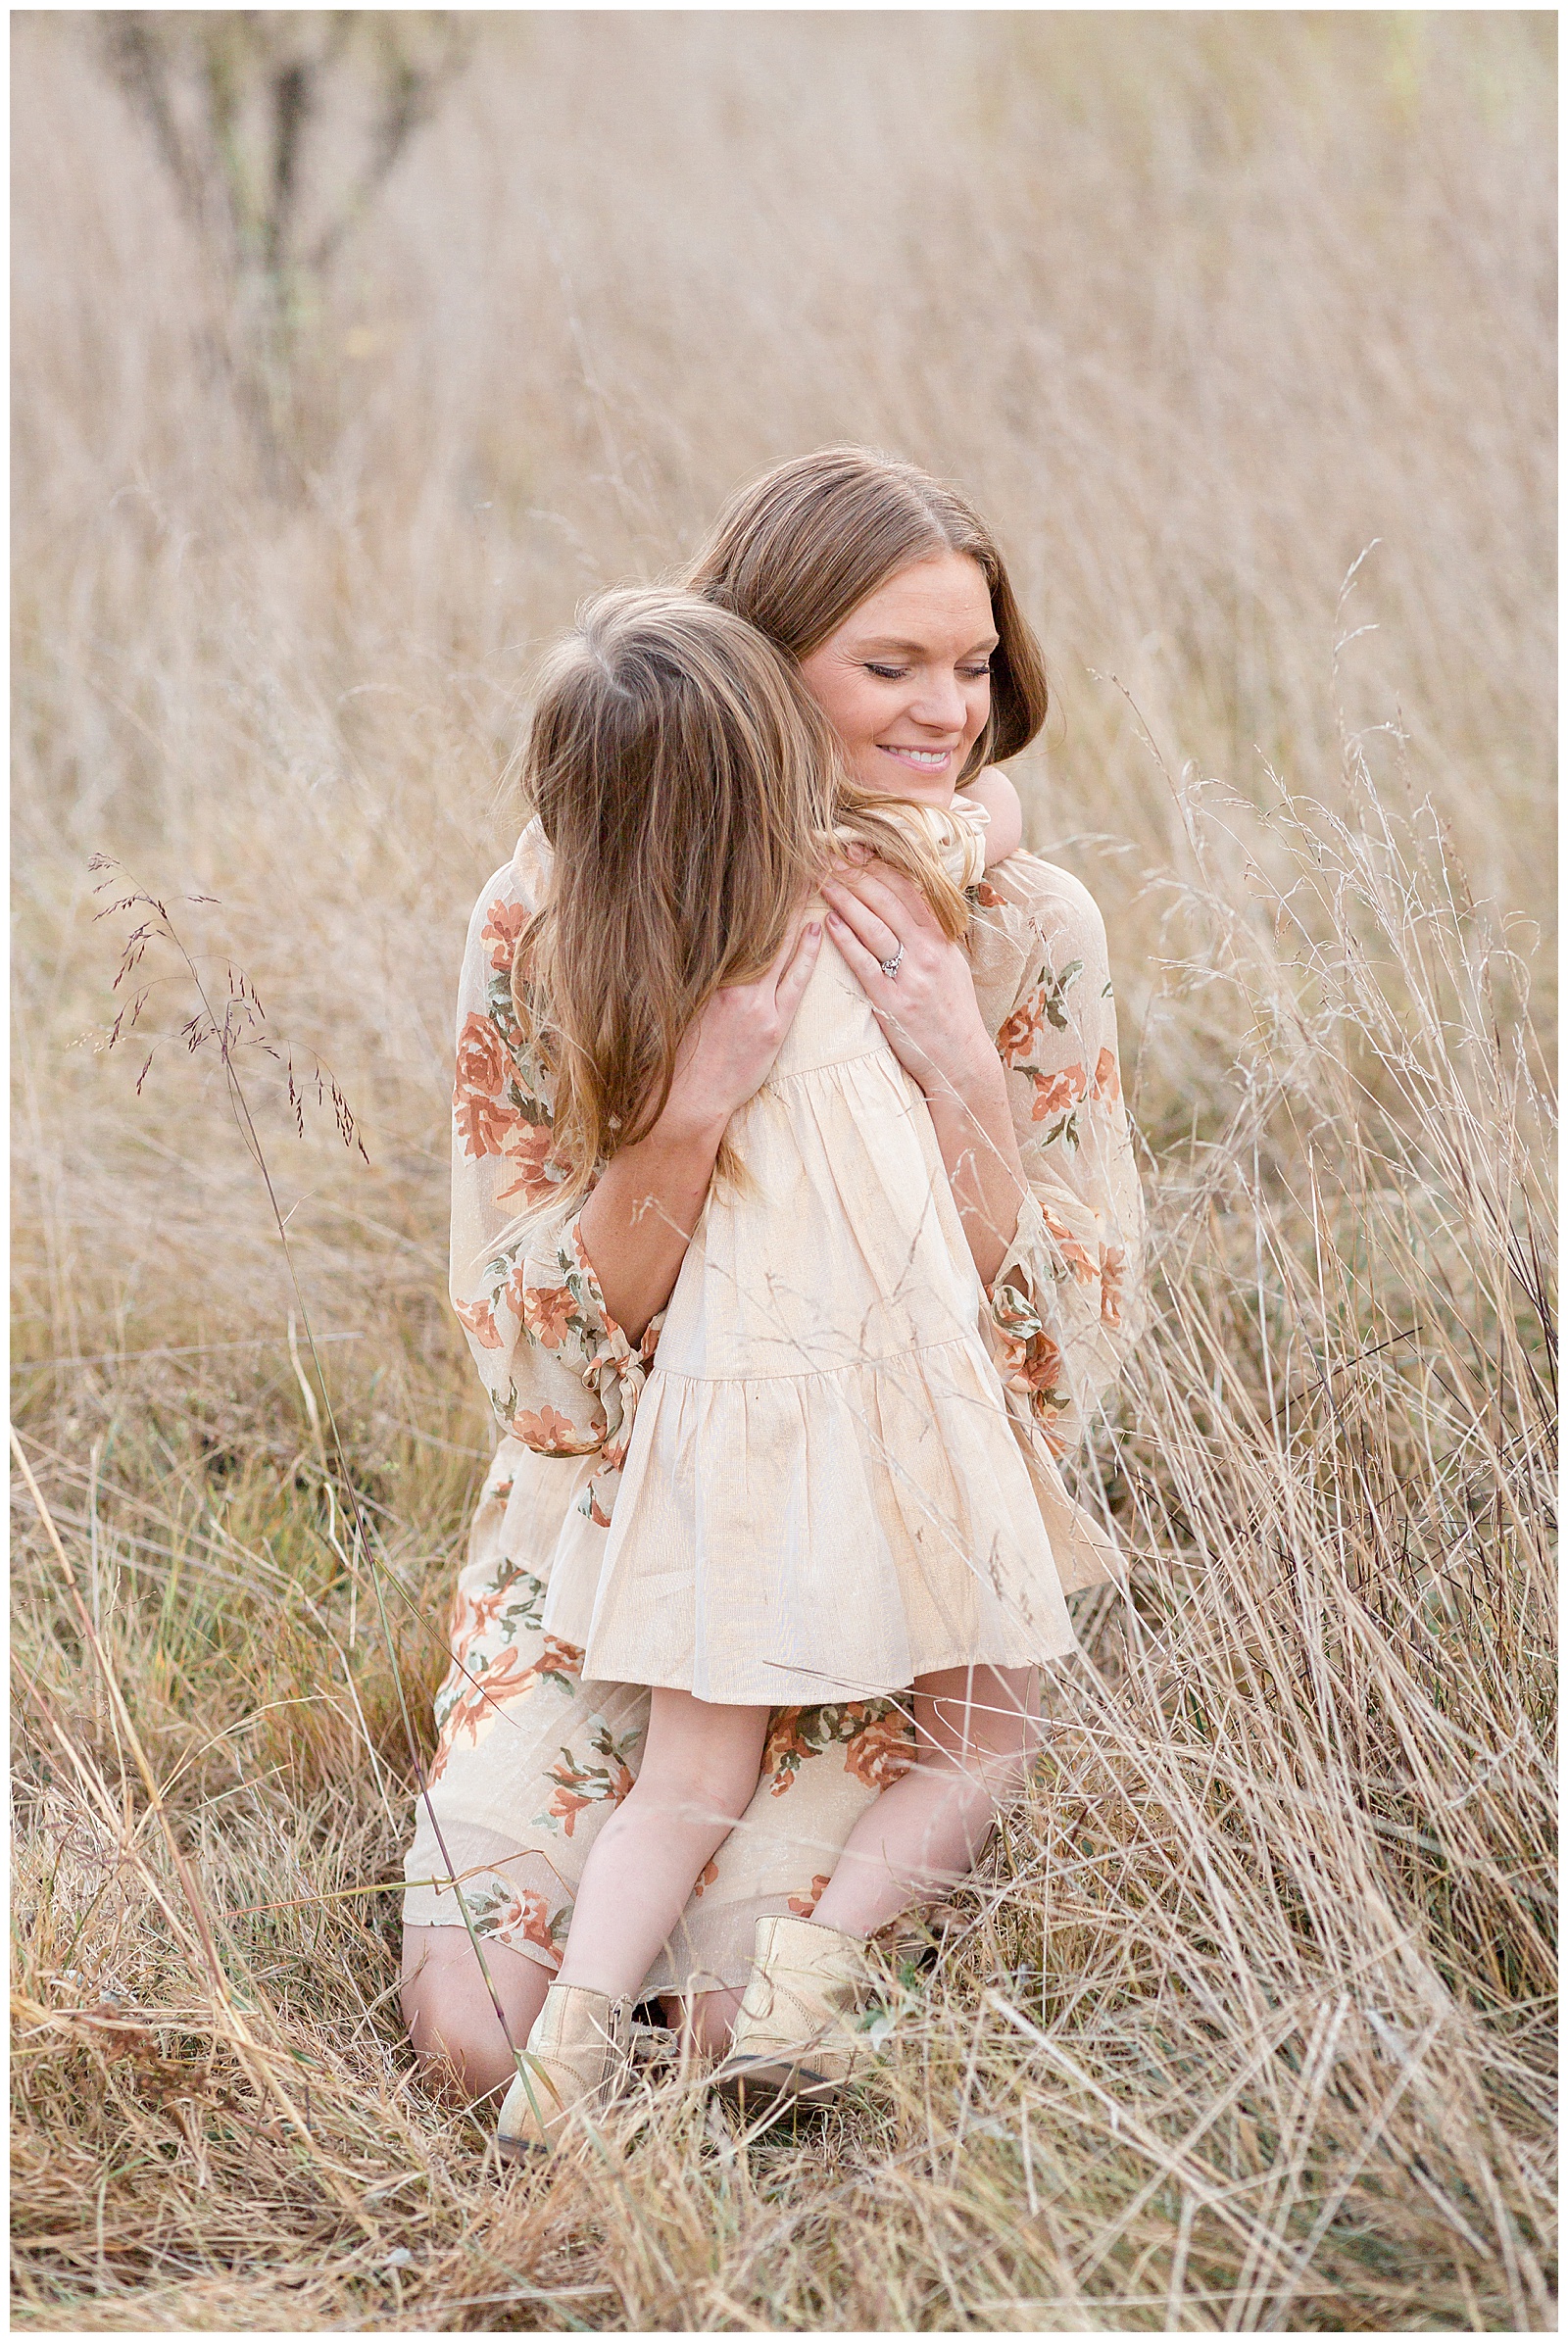 Mom and young daughter share a big hug together in a field in Nashville as they wear cream colored dresses.